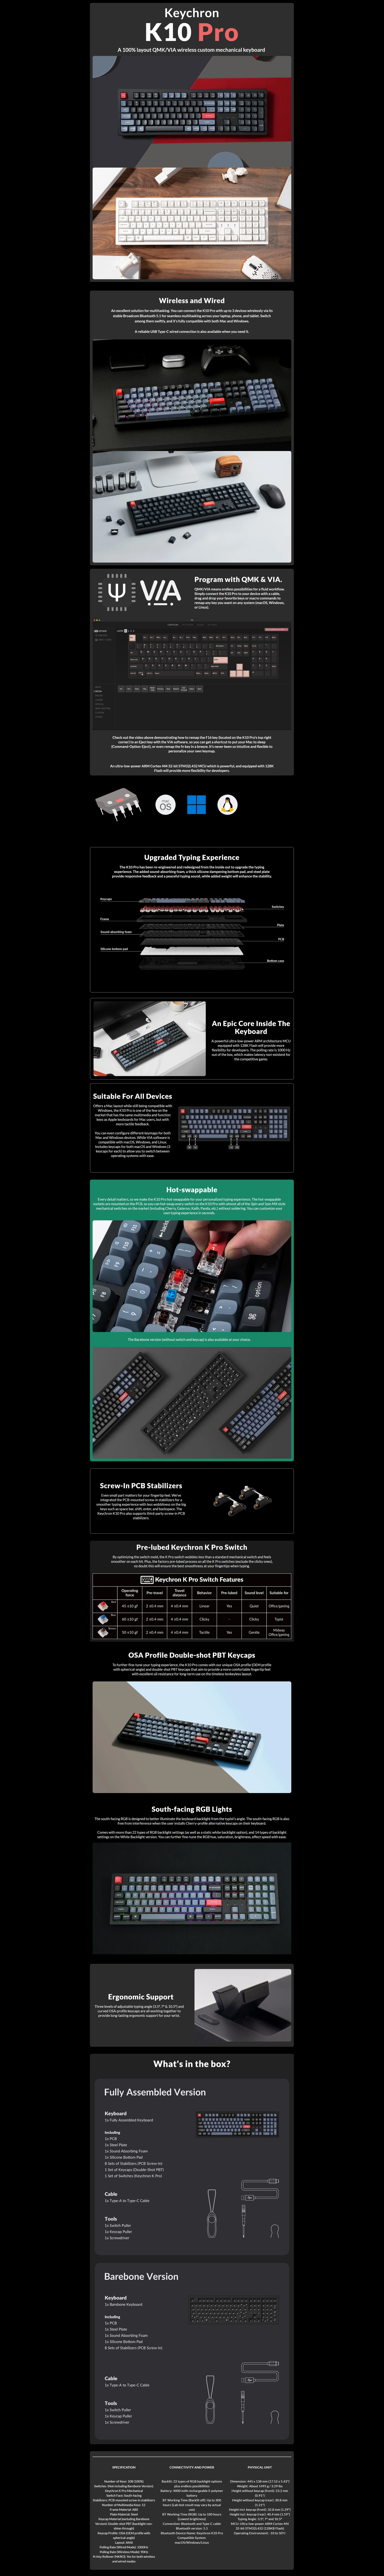 A large marketing image providing additional information about the product Keychron K10 Pro QMK/VIA Wireless Mechanical Keyboard White (Brown Switch) - Additional alt info not provided